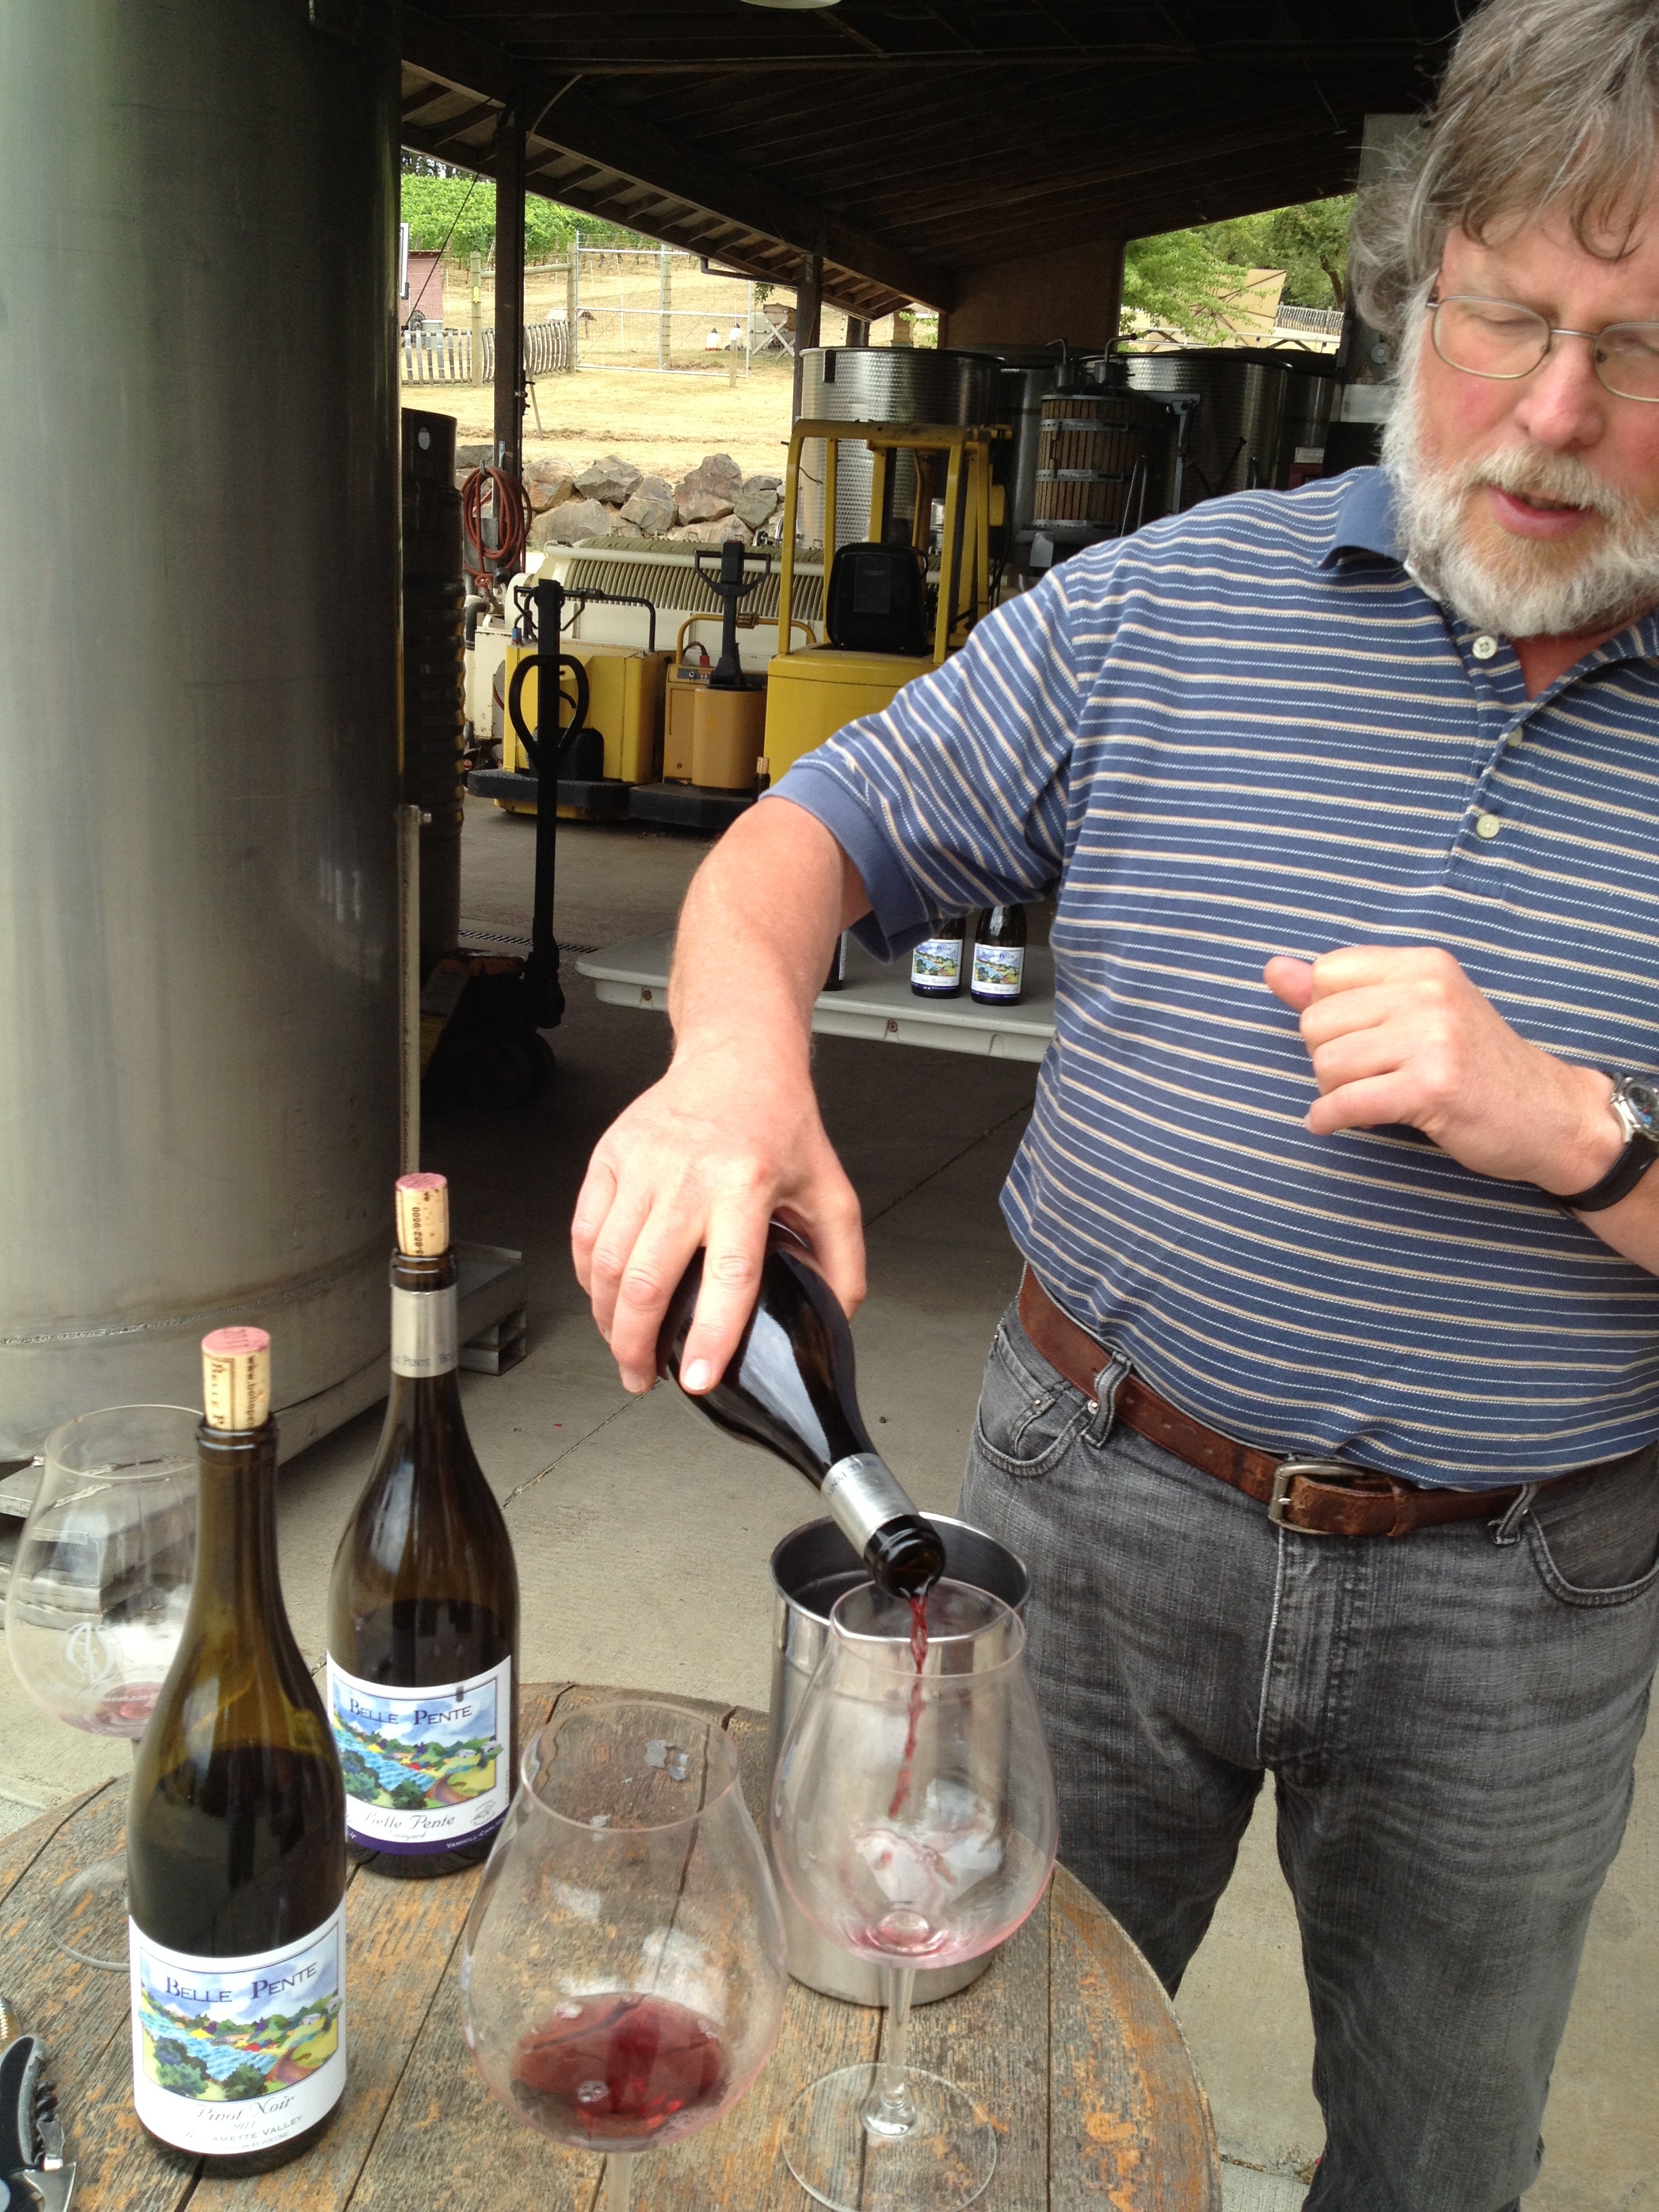  Quick stop to meet Brian O'Donnell and taste his wines at Belle Pente (Bell Pont) Winery.  